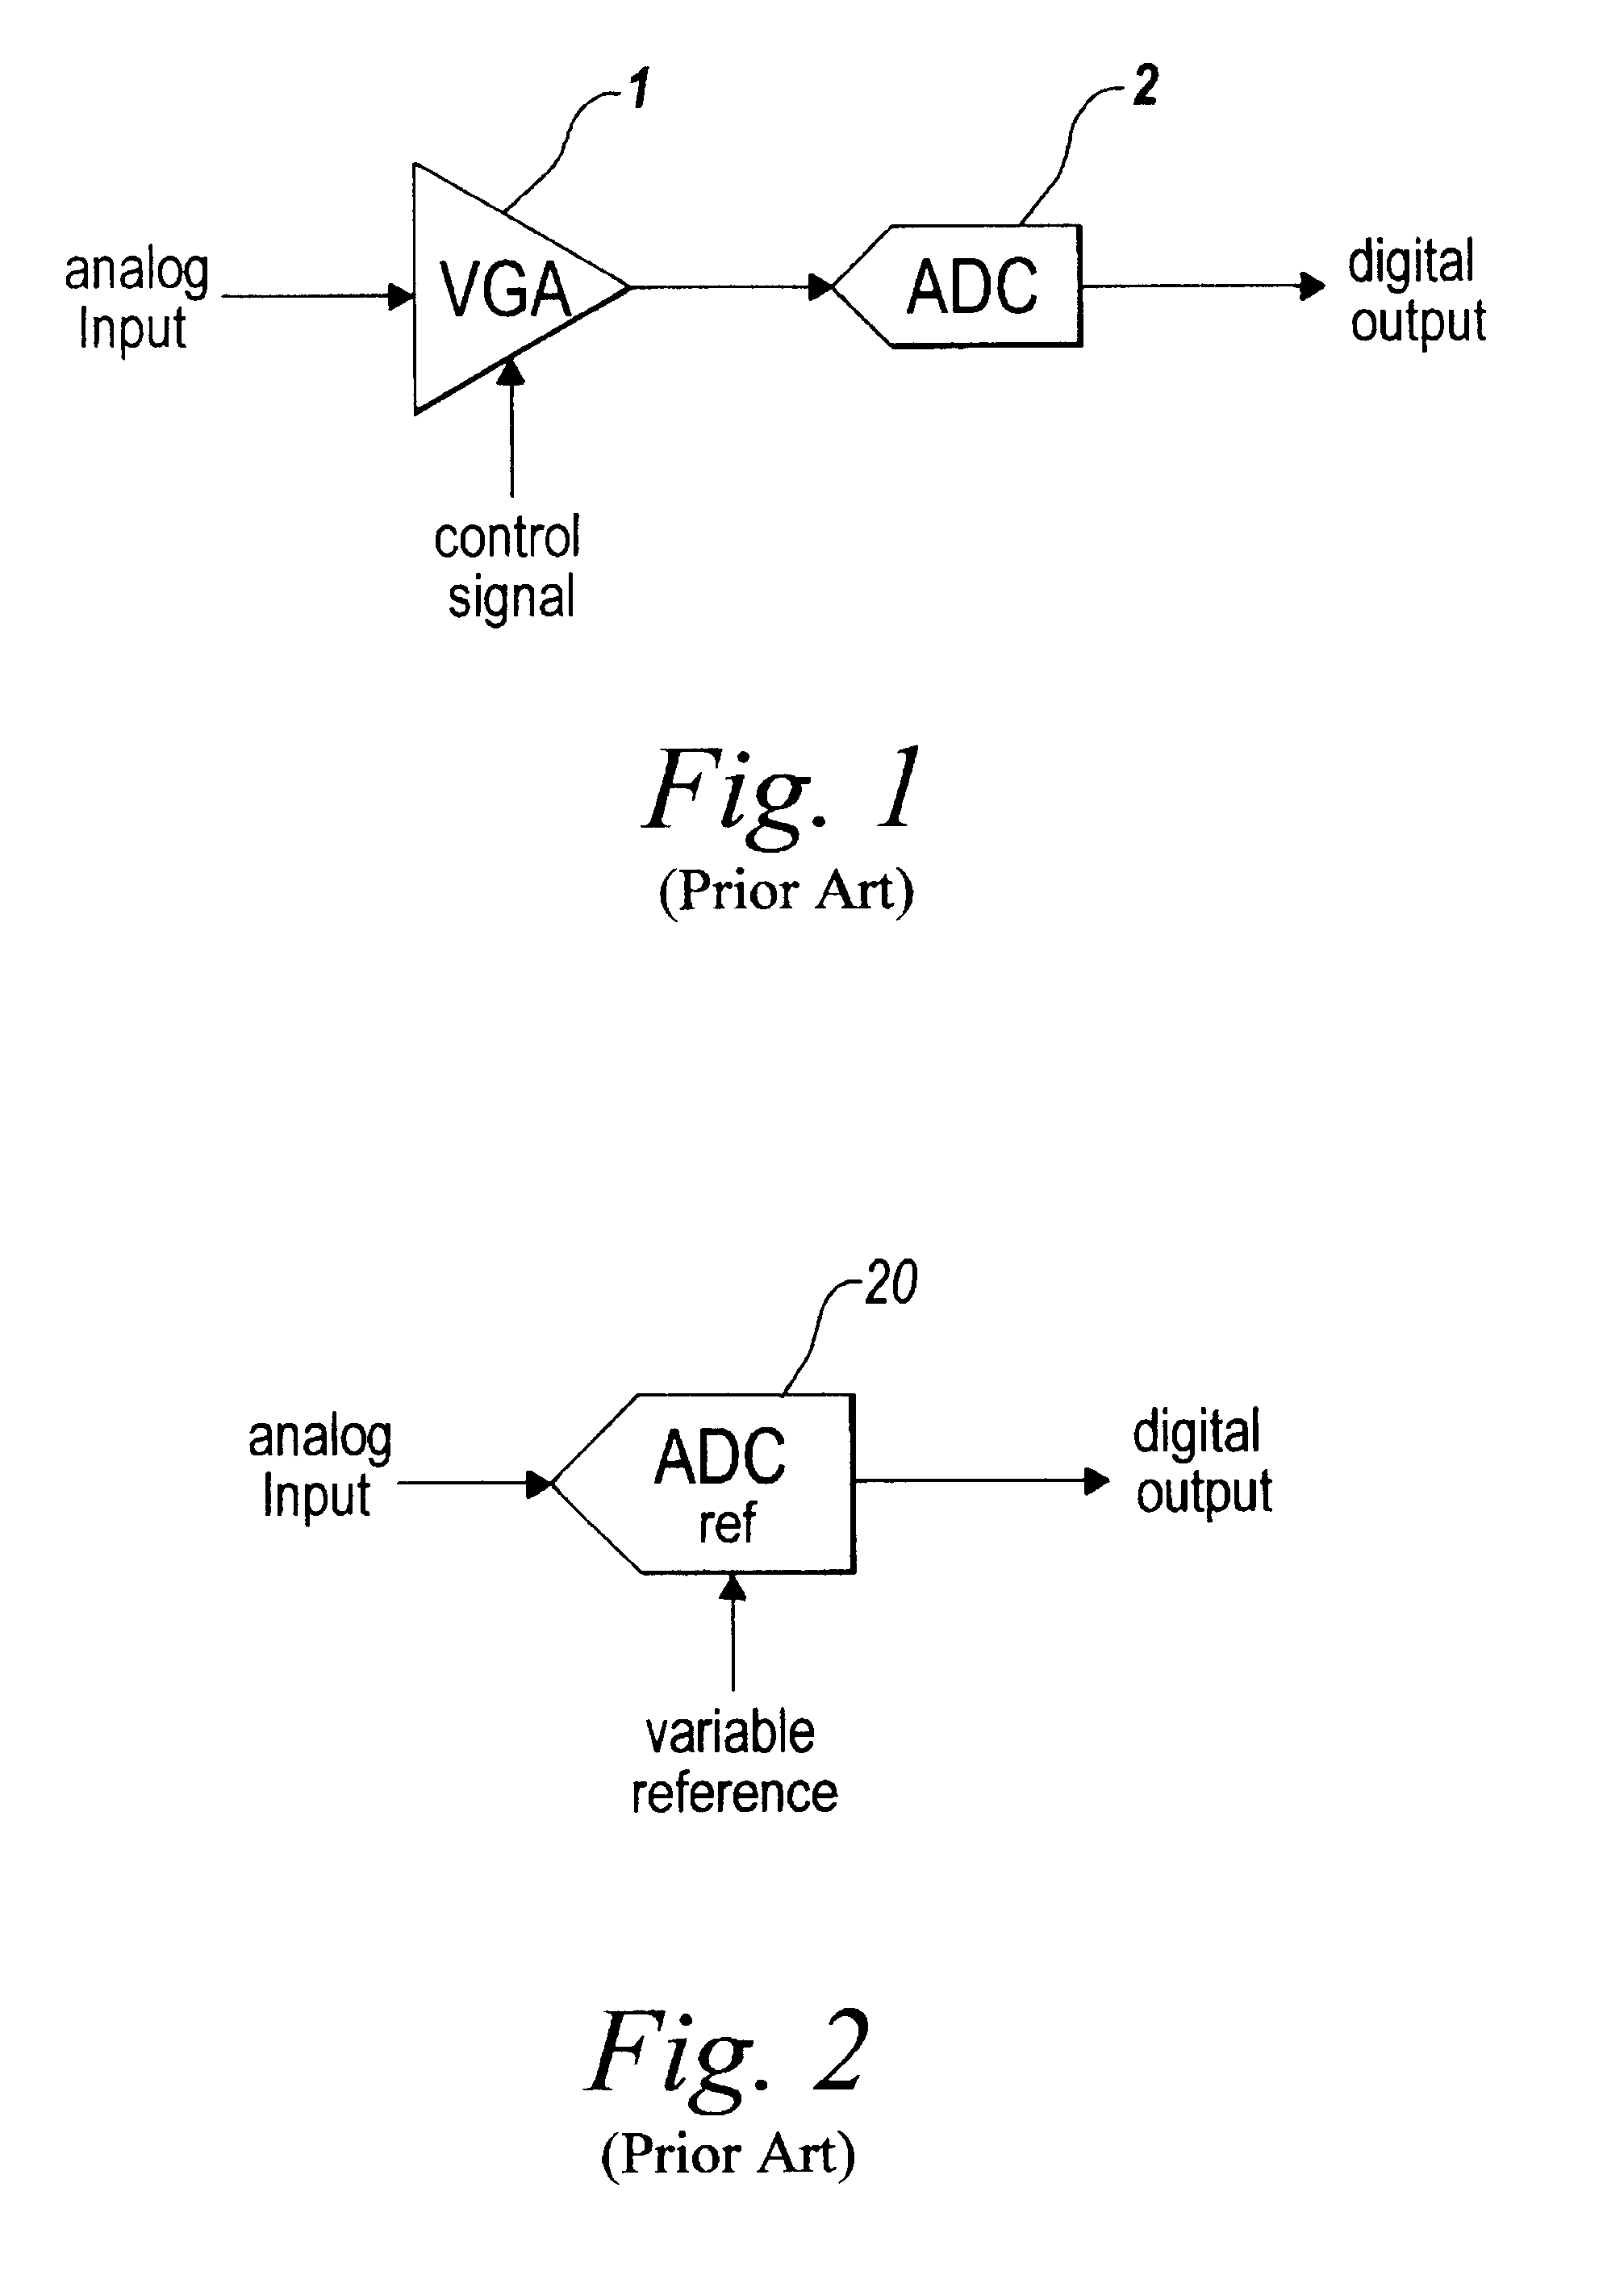 Multi-bit sigma-delta analog to digital converter with a variable full scale